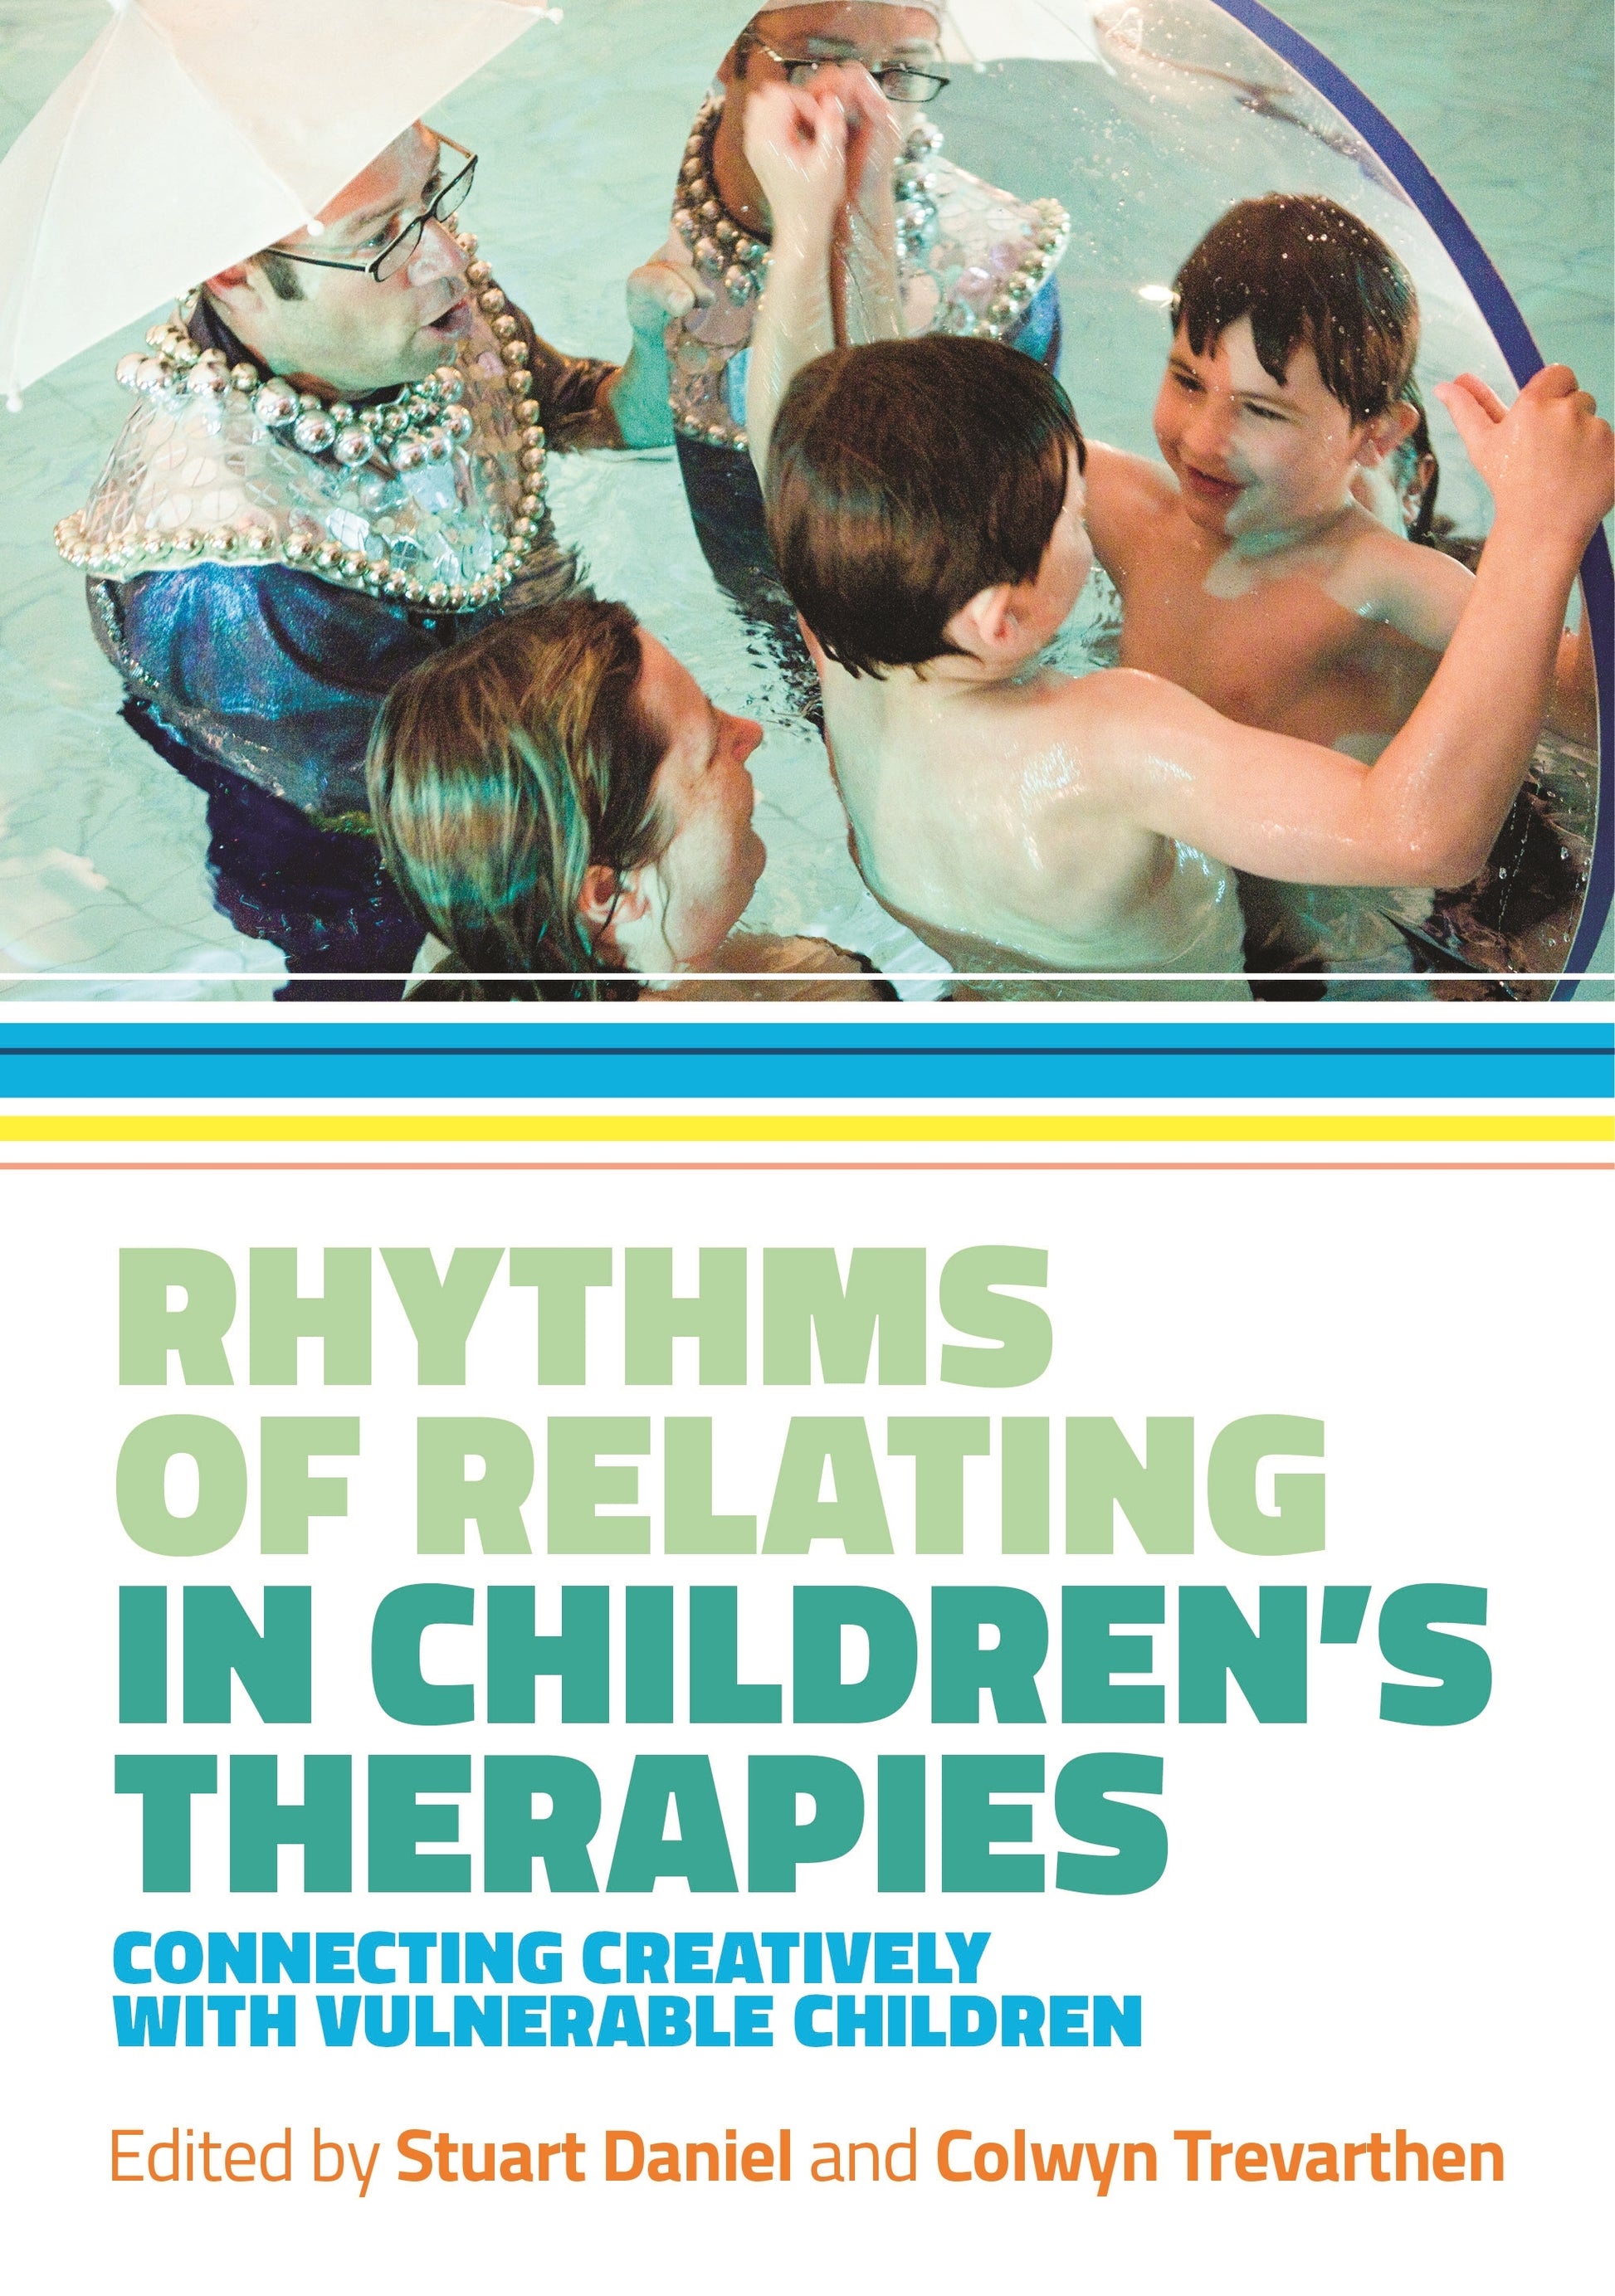 Rhythms of Relating in Children's Therapies by Stuart Daniel, Colwyn Trevarthen, No Author Listed